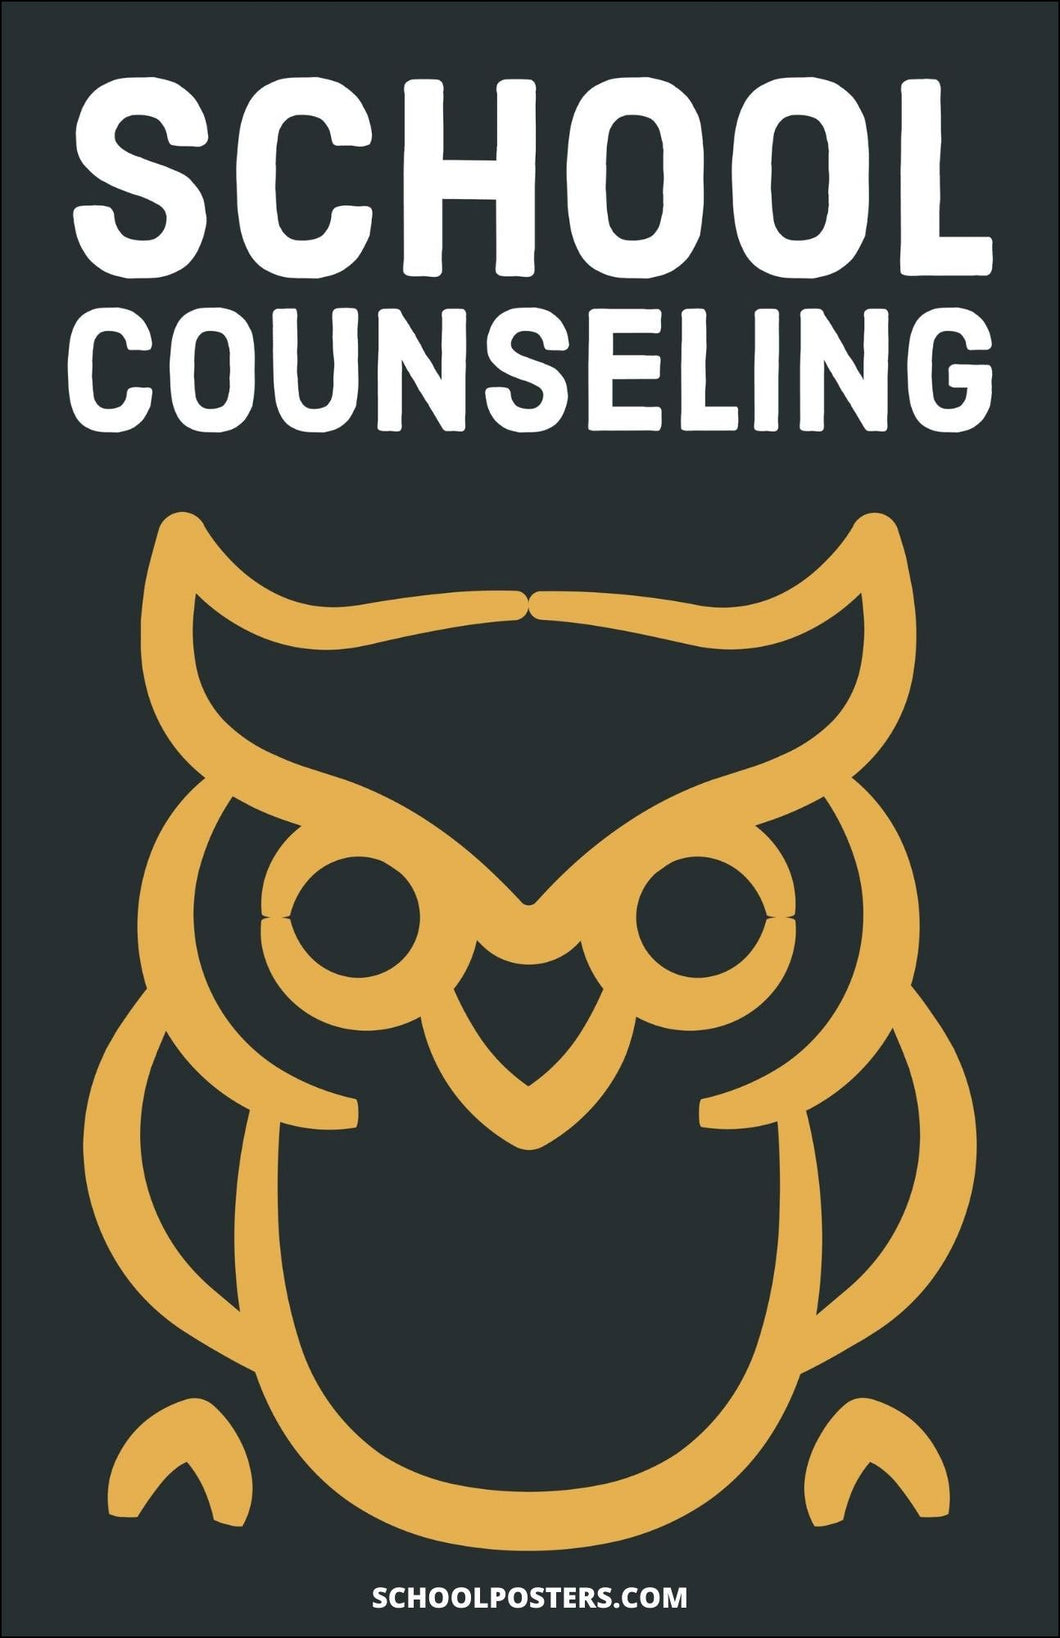 School Counseling Poster